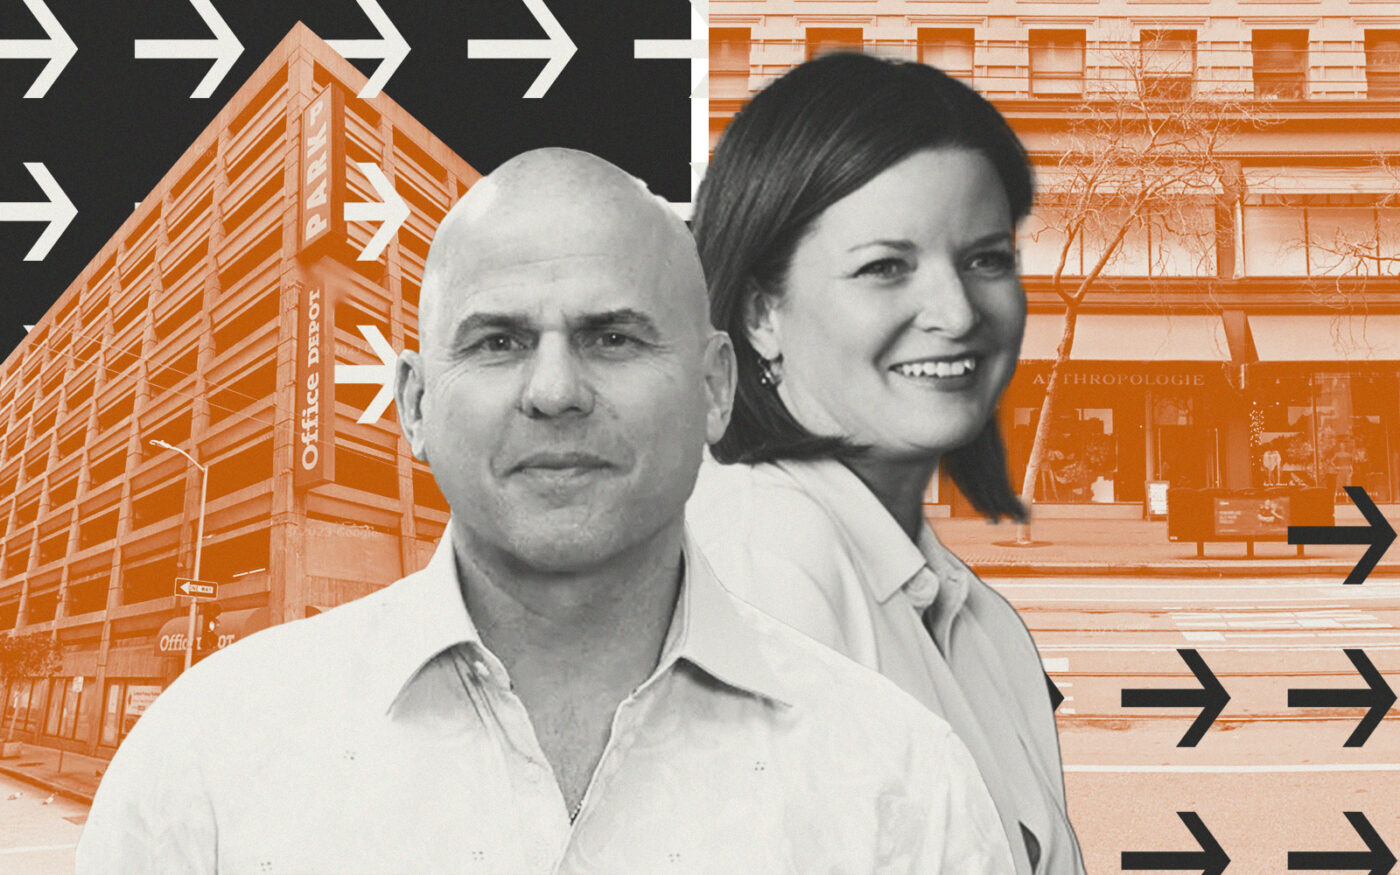 Office Depot's Gerry Smith and Anthropologie's Tricia Smith with 33 Third Street and 880 Market Street